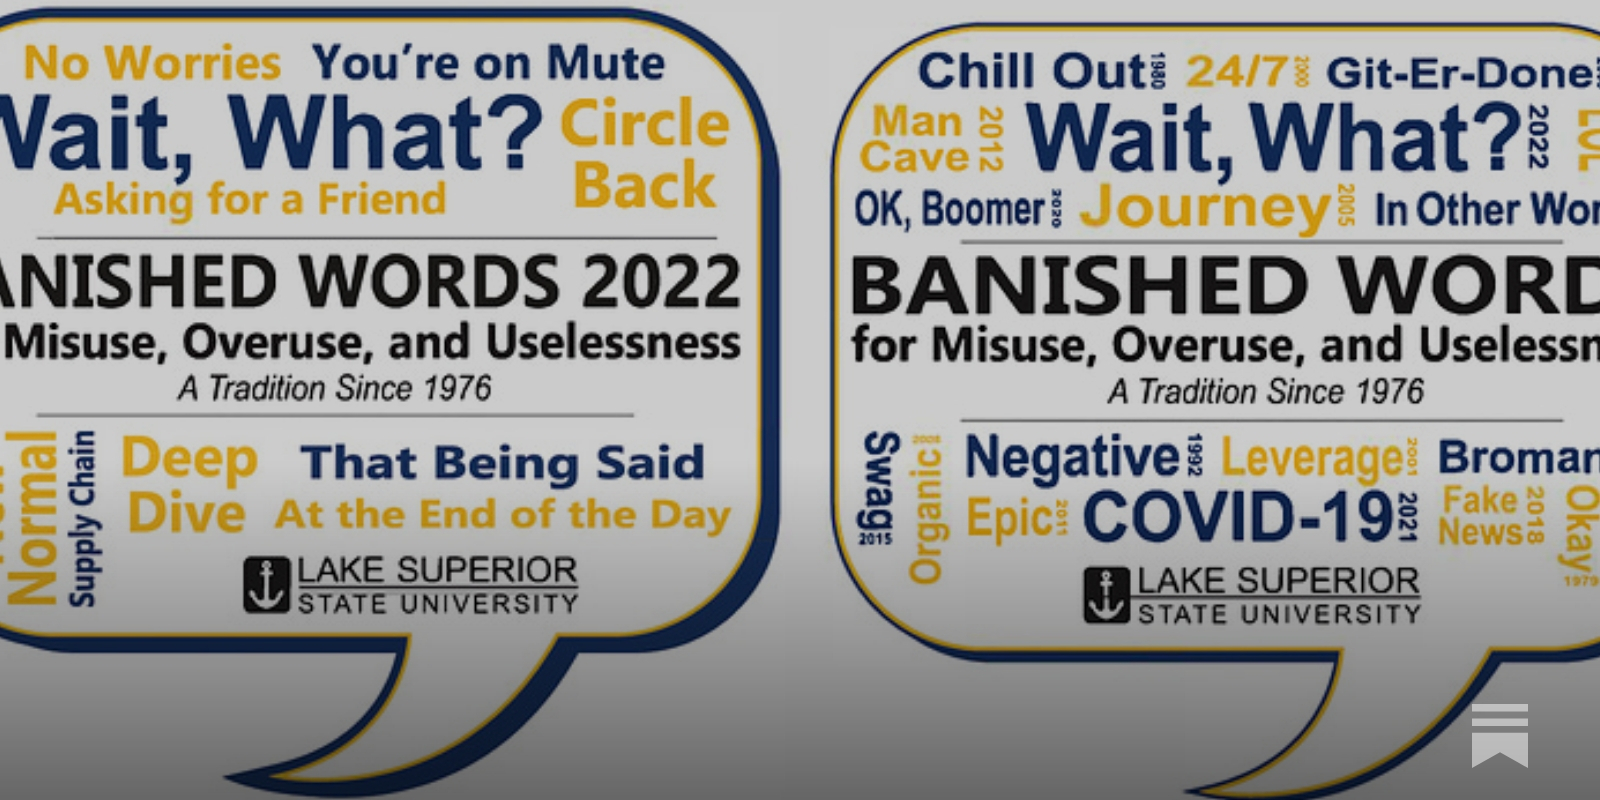 Banished Words Listed By Year 1976 - 2022